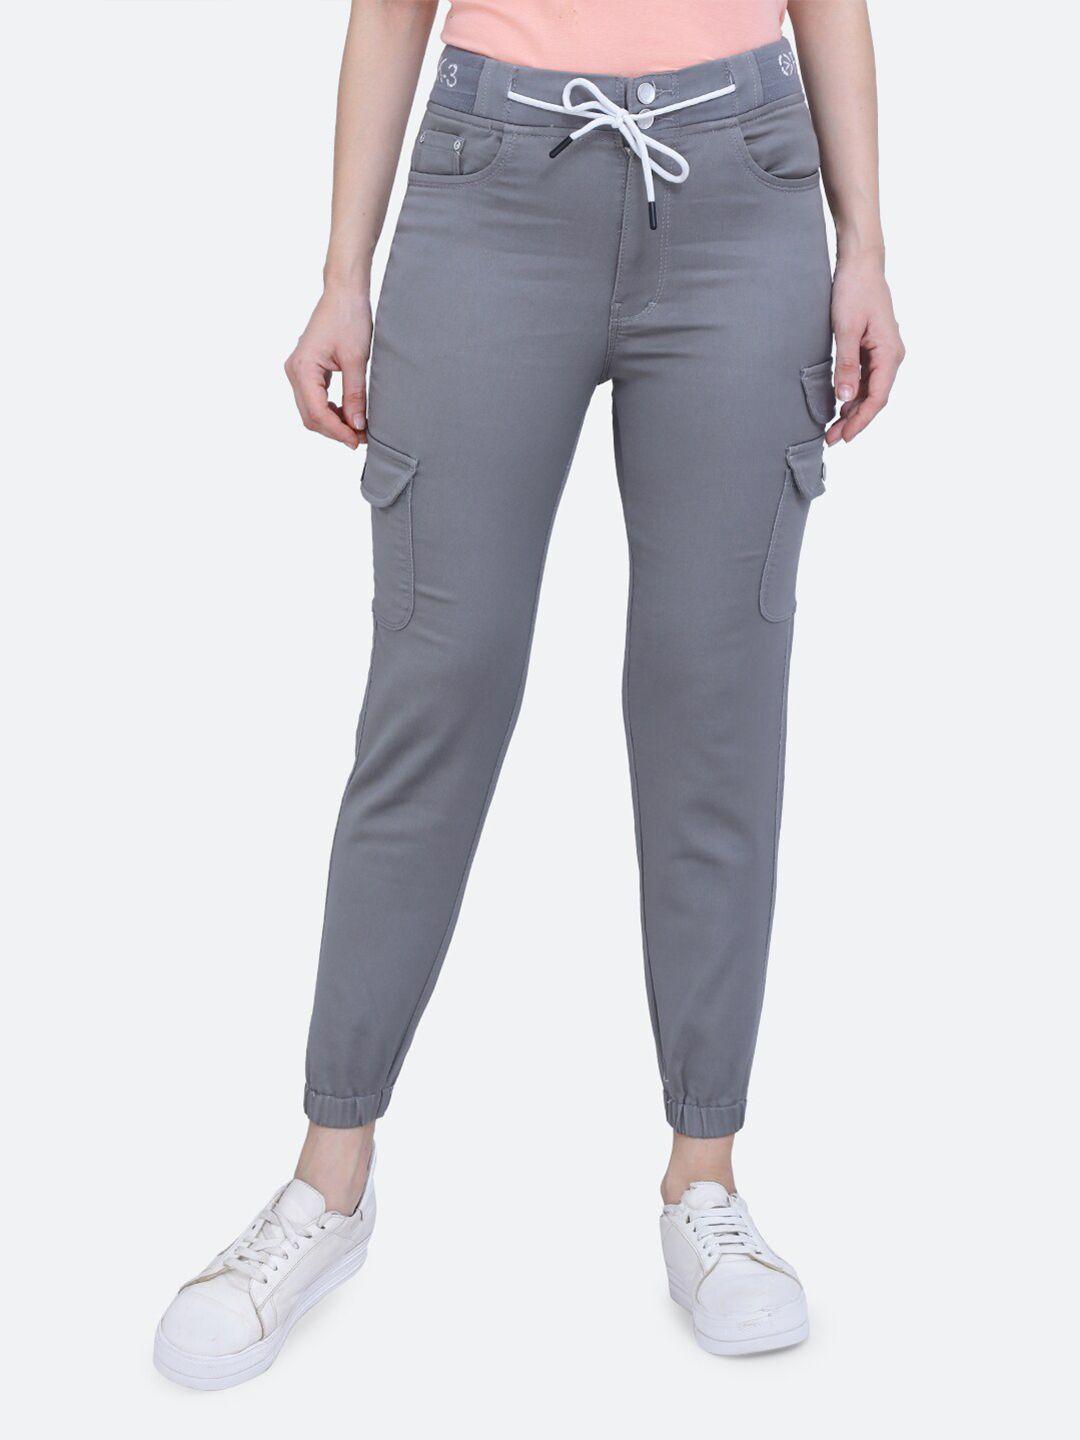 fck-3 women mid rise clean look stretchable jogger